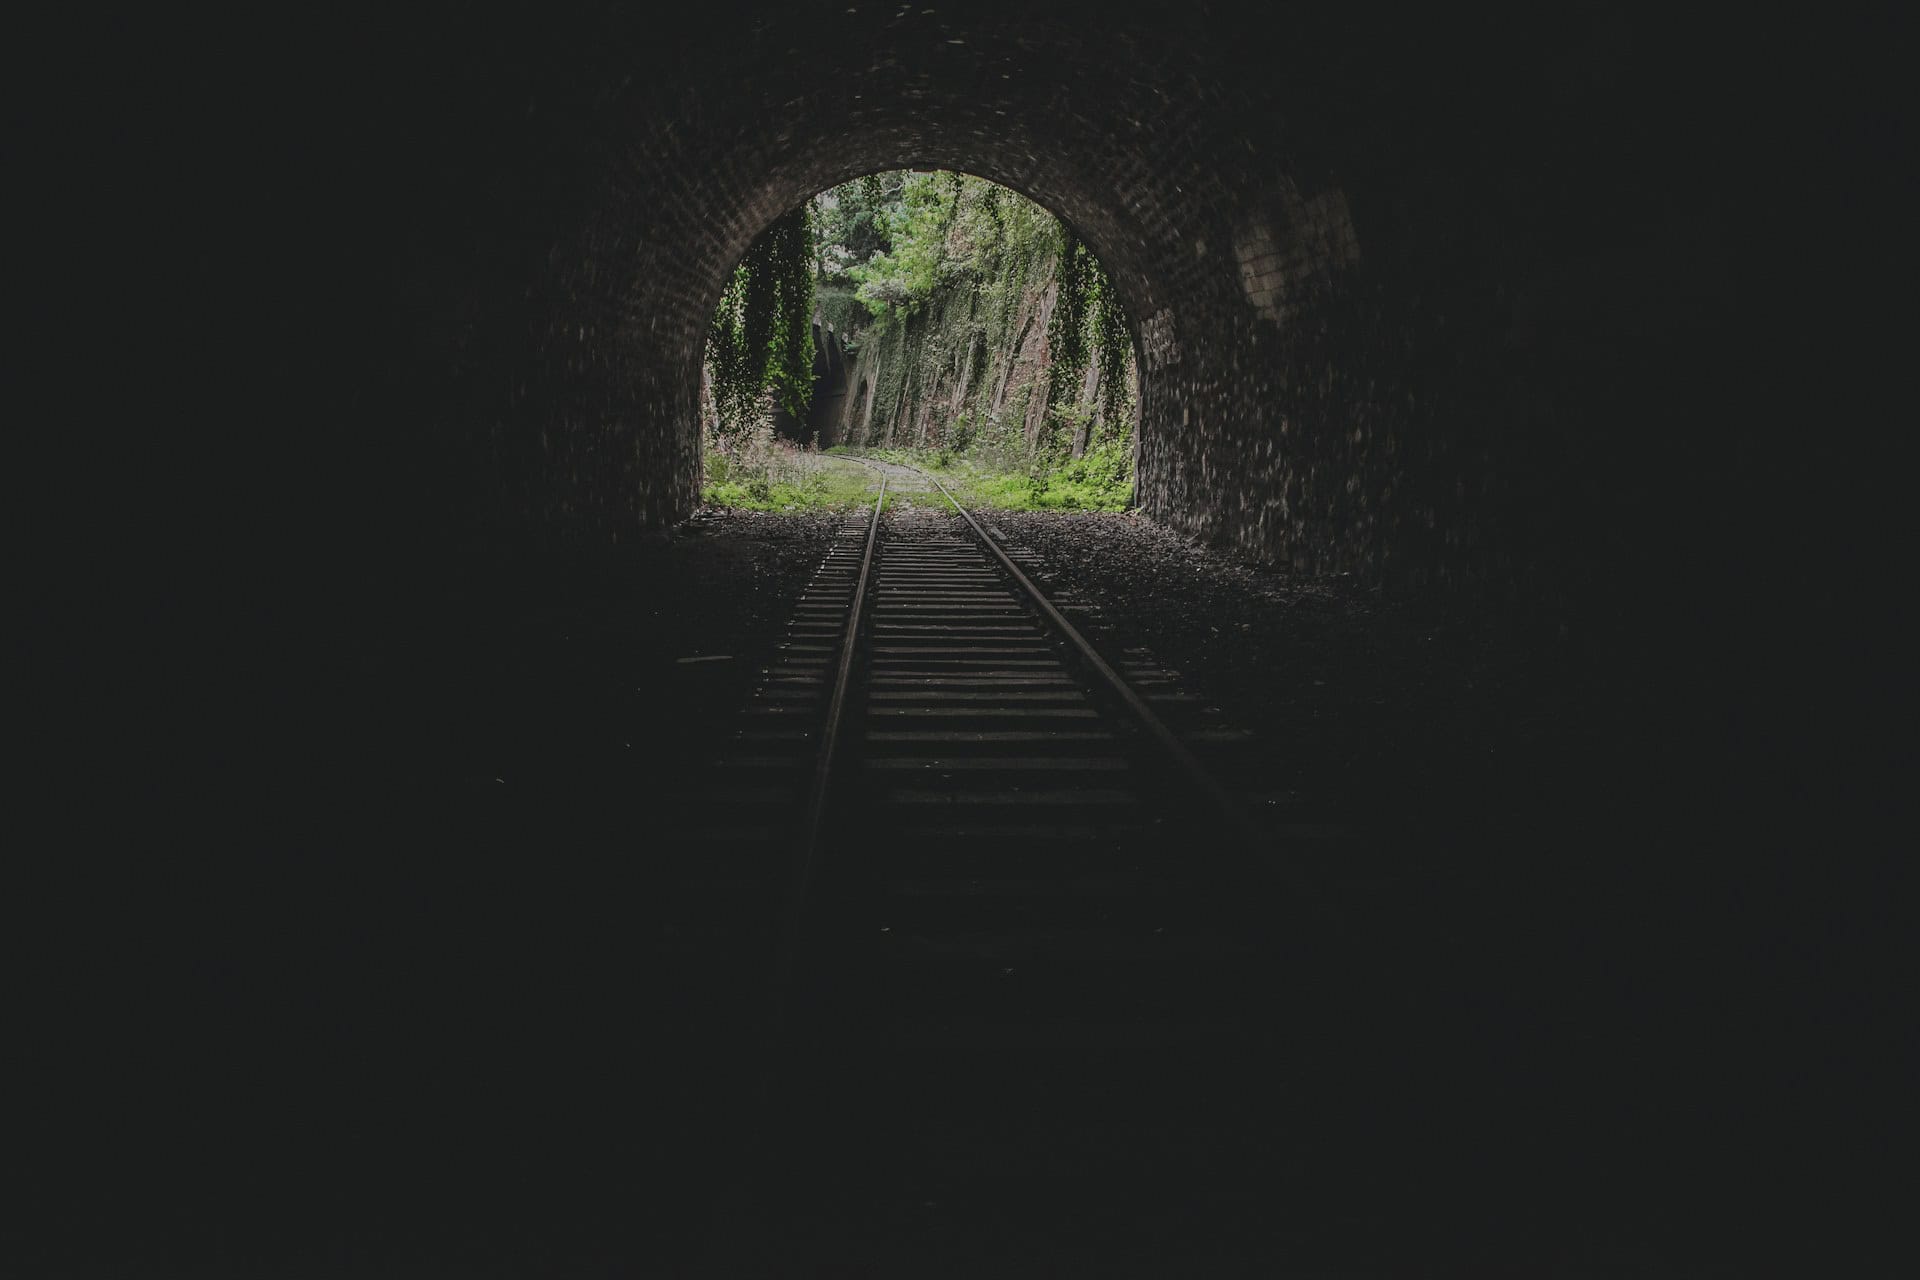 emerging from a tunnel